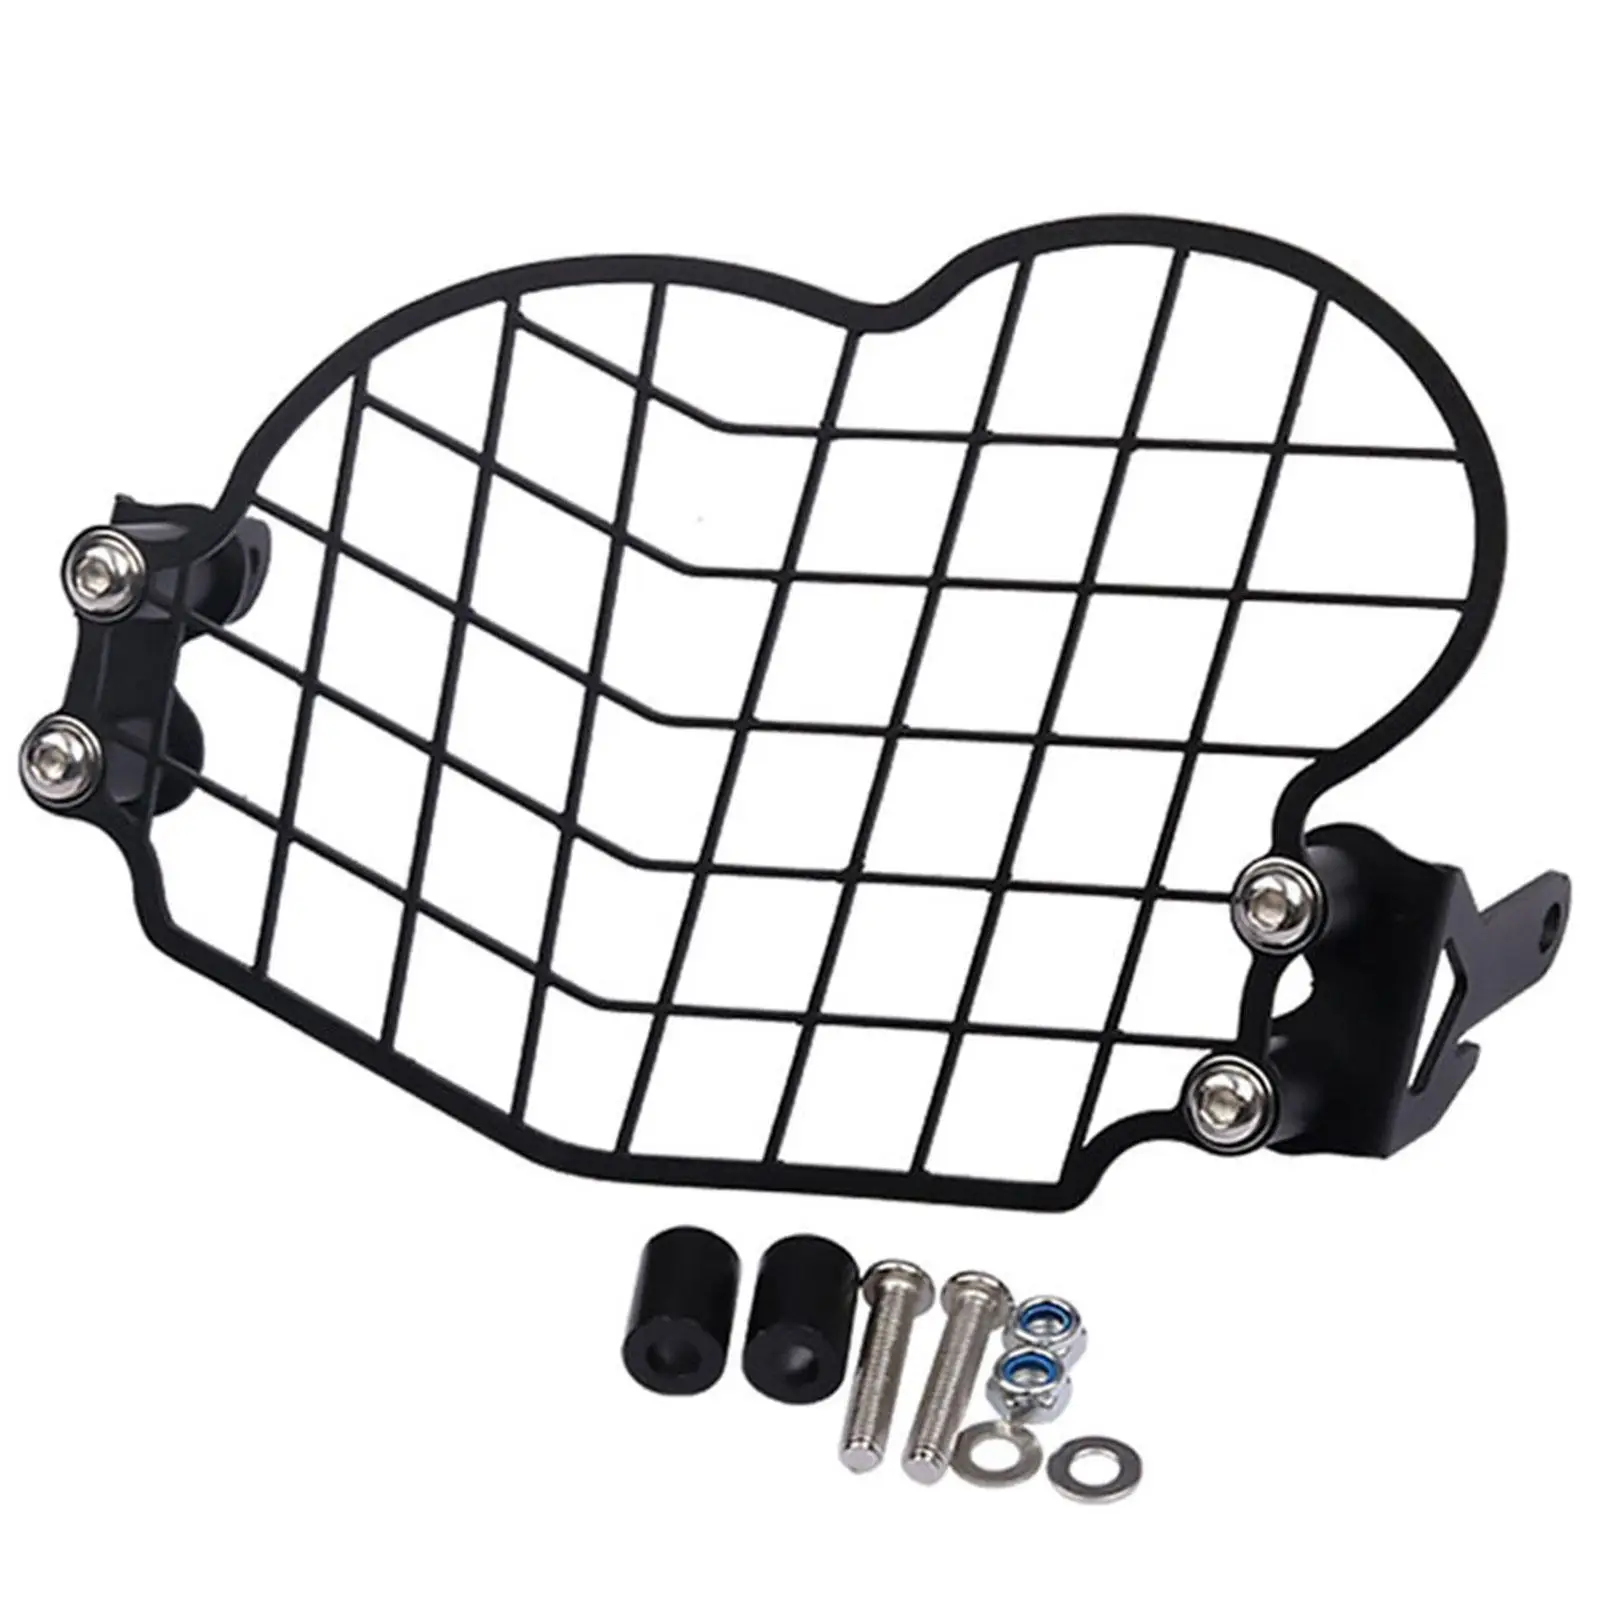 Headlight Guard Protector Replaces Headlamp Grille Cover for BMW G650GS